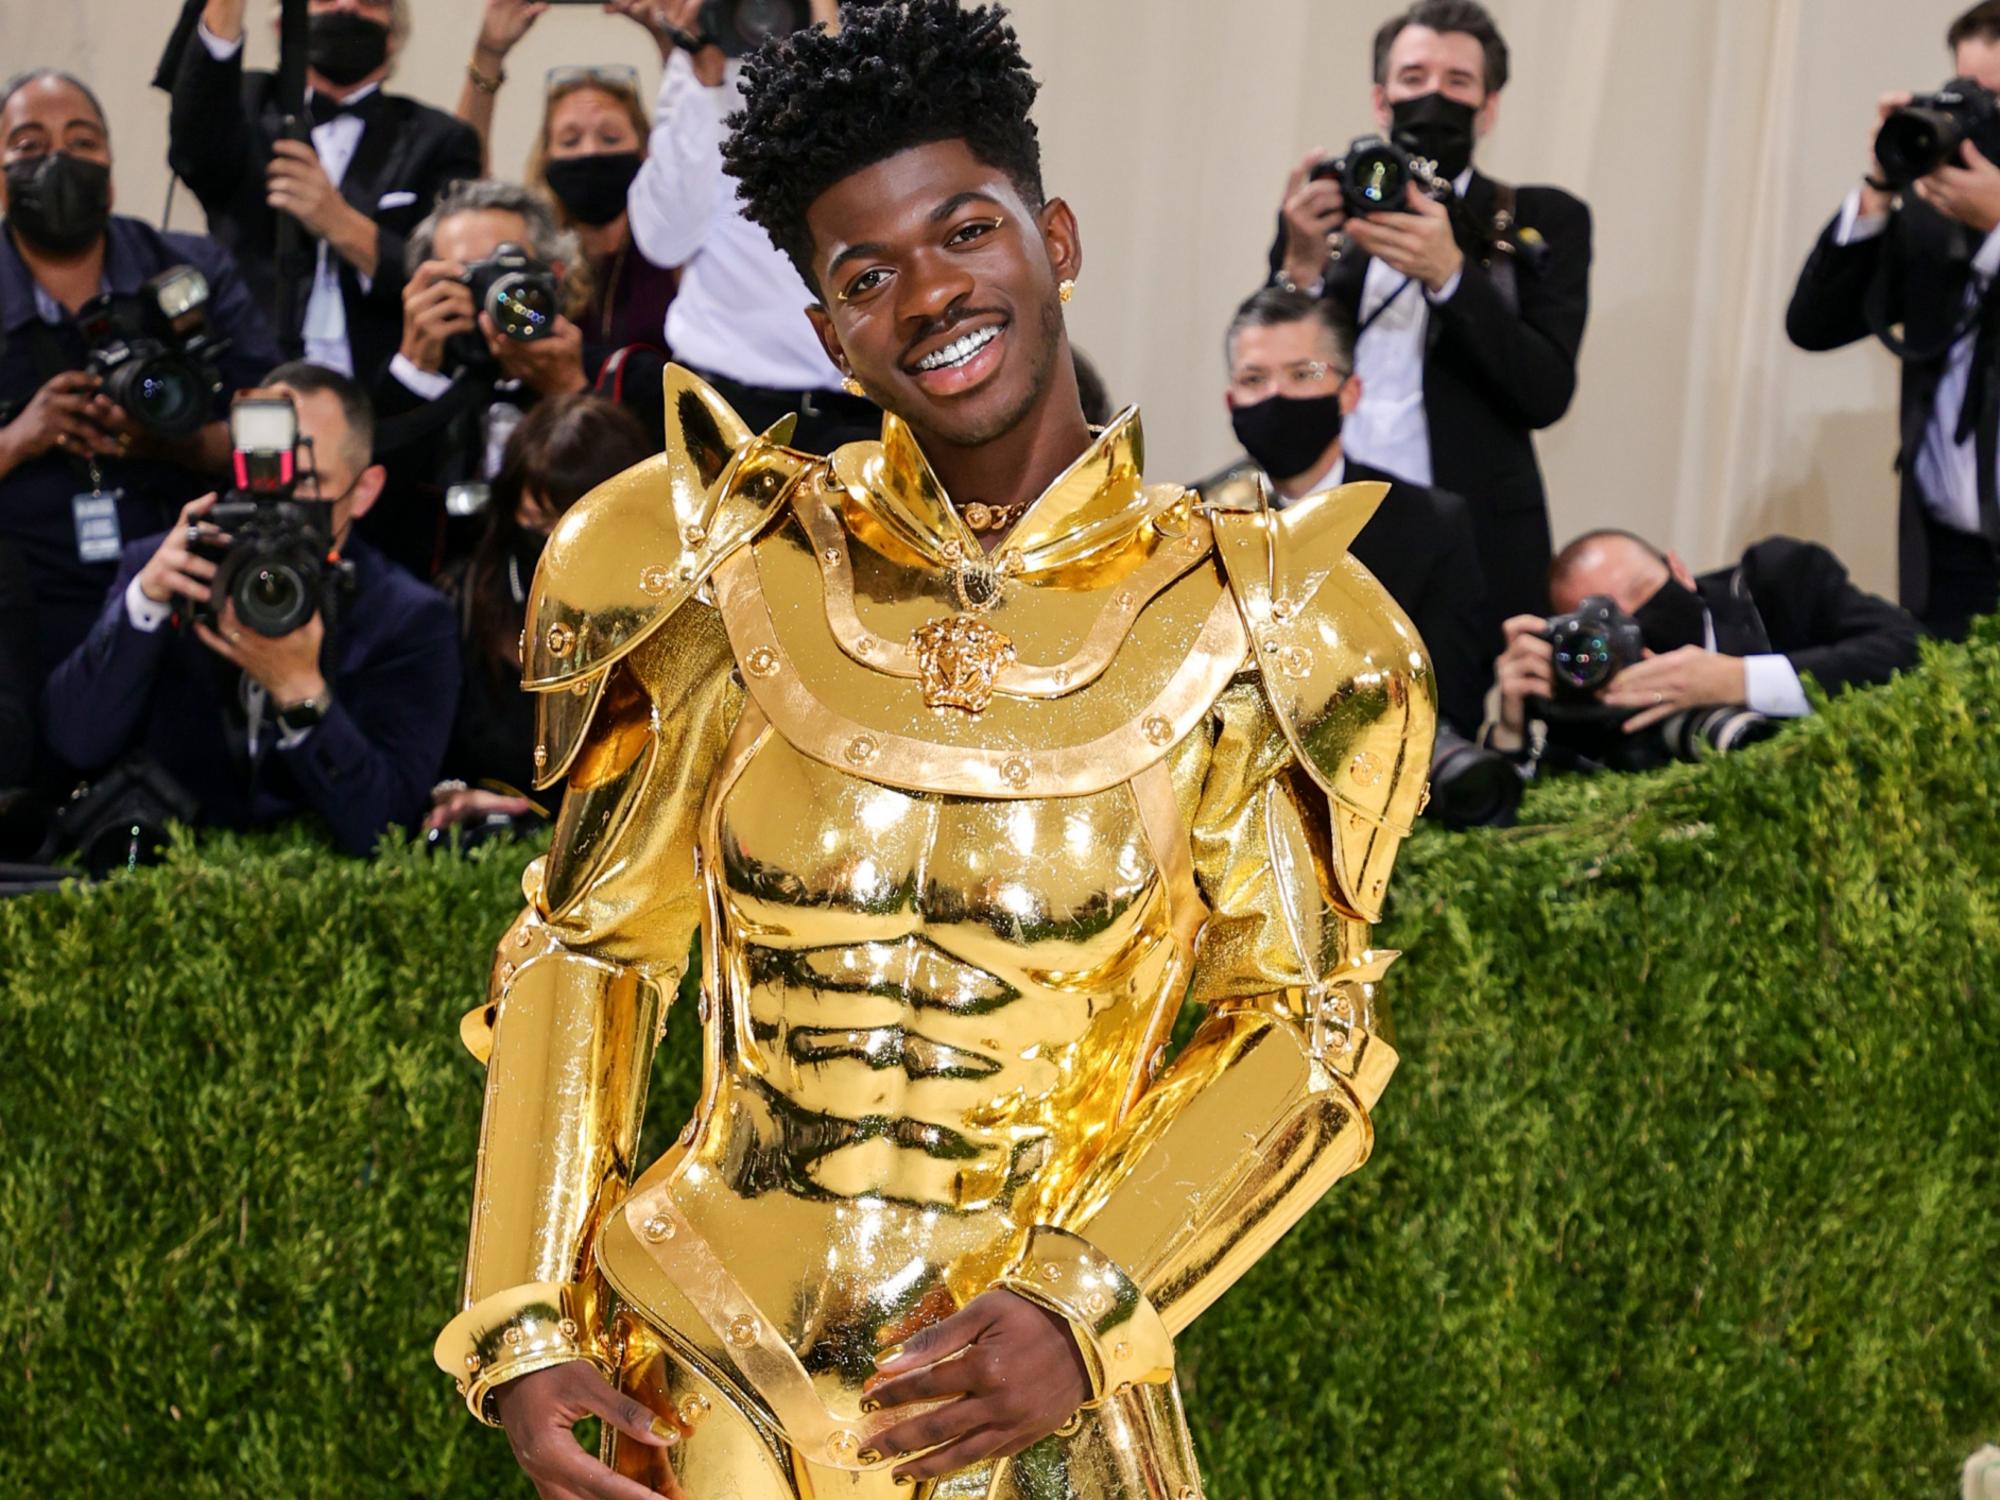 Lil Nas X Pulled a Lady Gaga With Three Outfit Changes at the Met